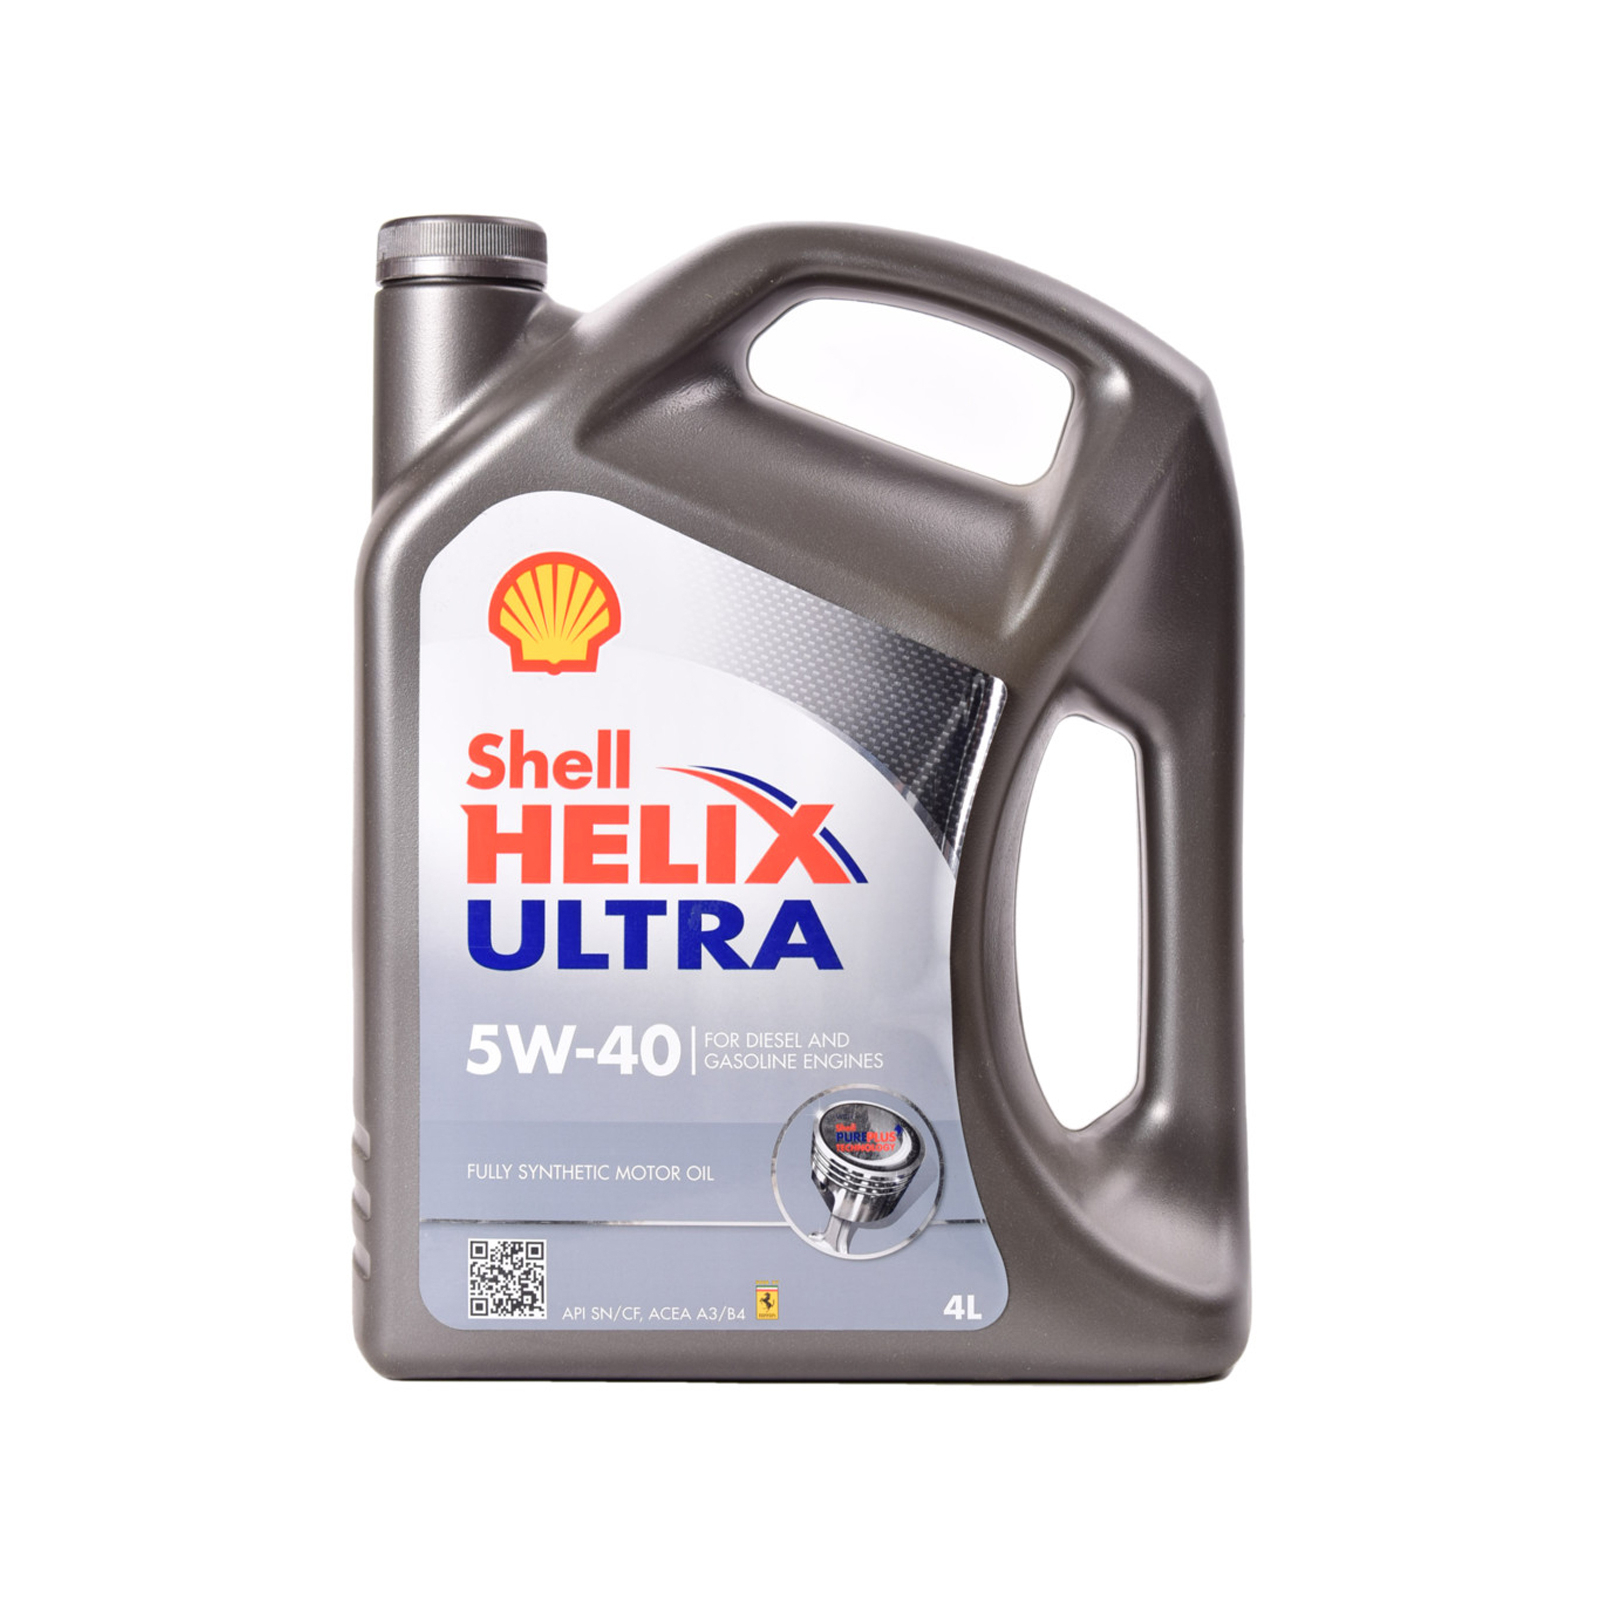 Моторное масло Shell Helix Ultra 5w/40 5л (73991)